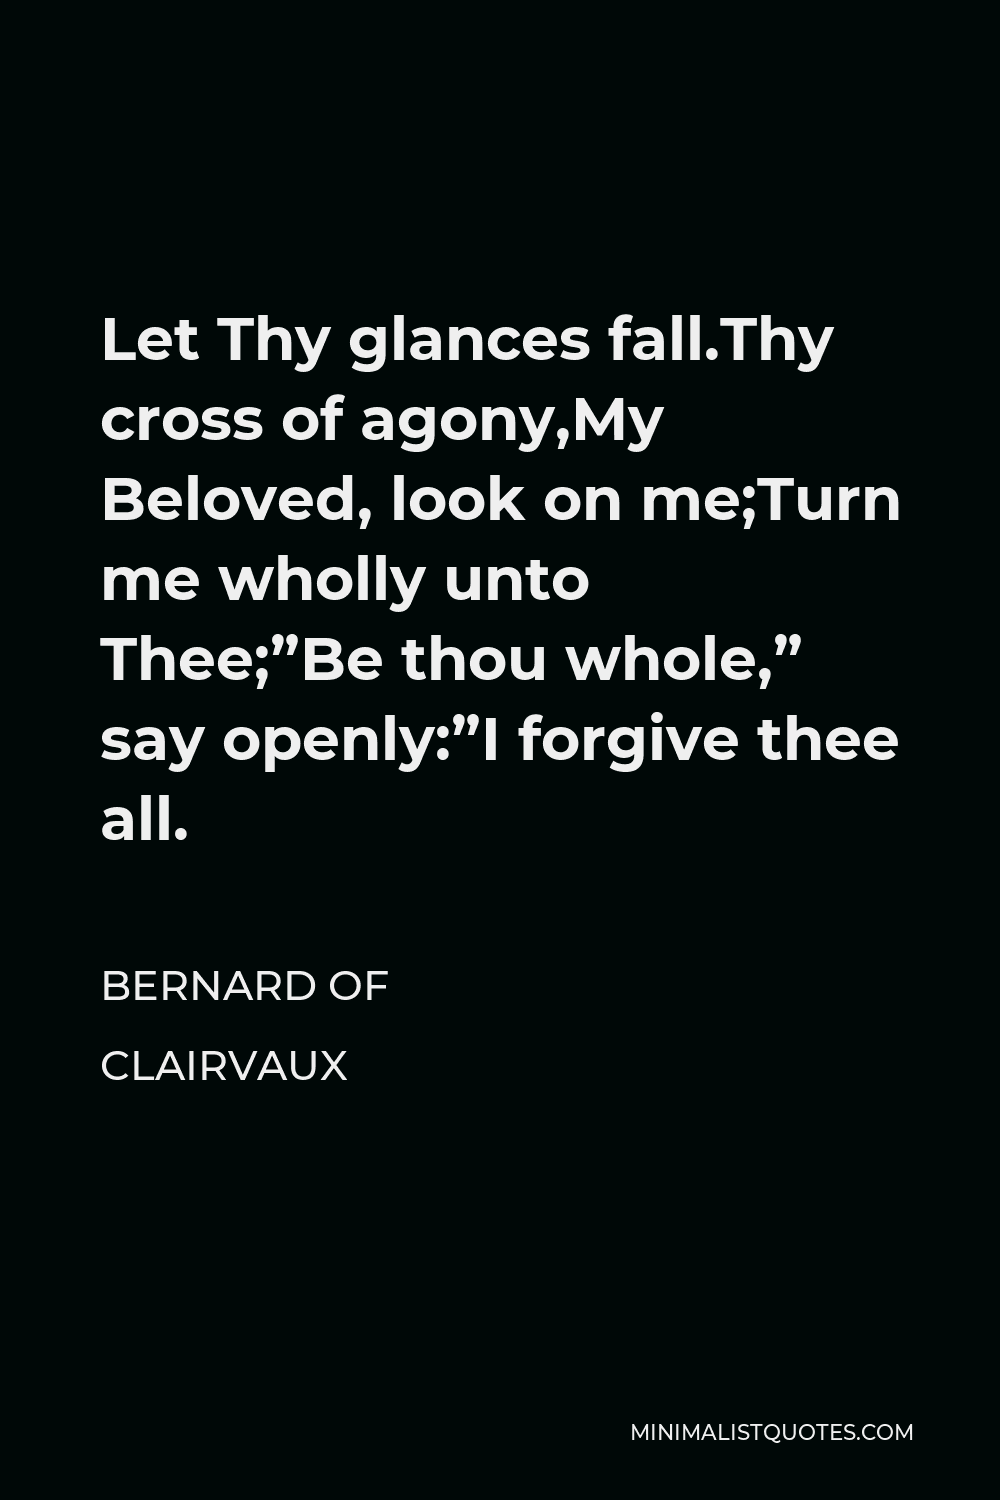 Bernard of Clairvaux Quote - Let Thy glances fall.Thy cross of agony,My Beloved, look on me;Turn me wholly unto Thee;”Be thou whole,” say openly:”I forgive thee all.